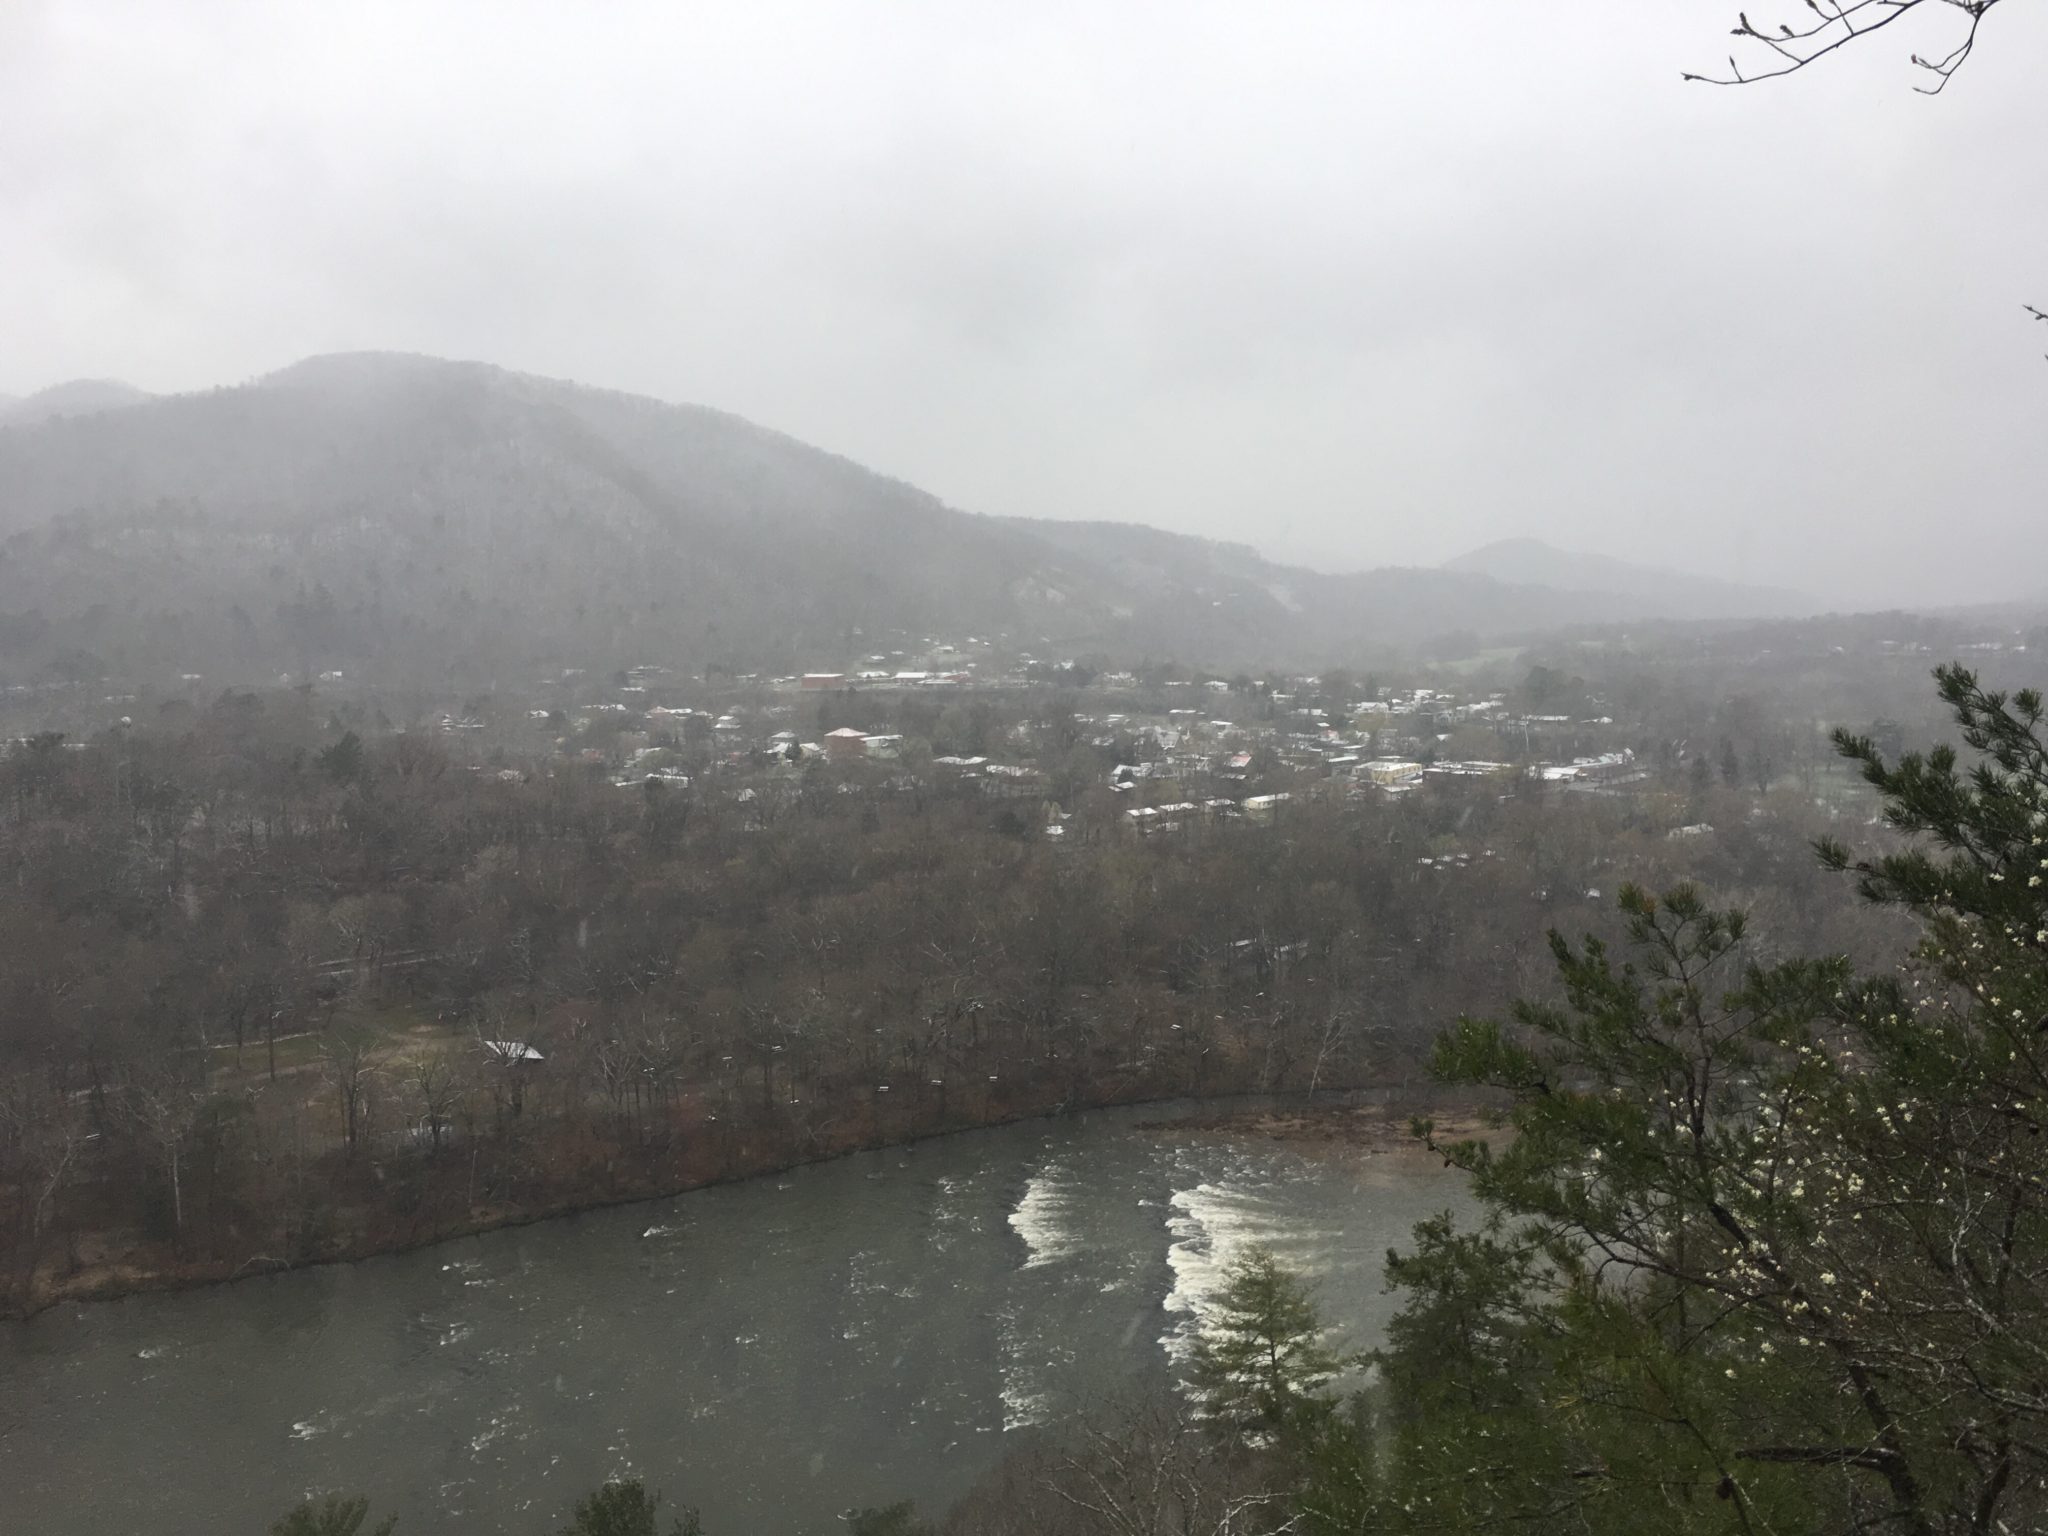 Looking down at Hot Springs from Lovers Leap